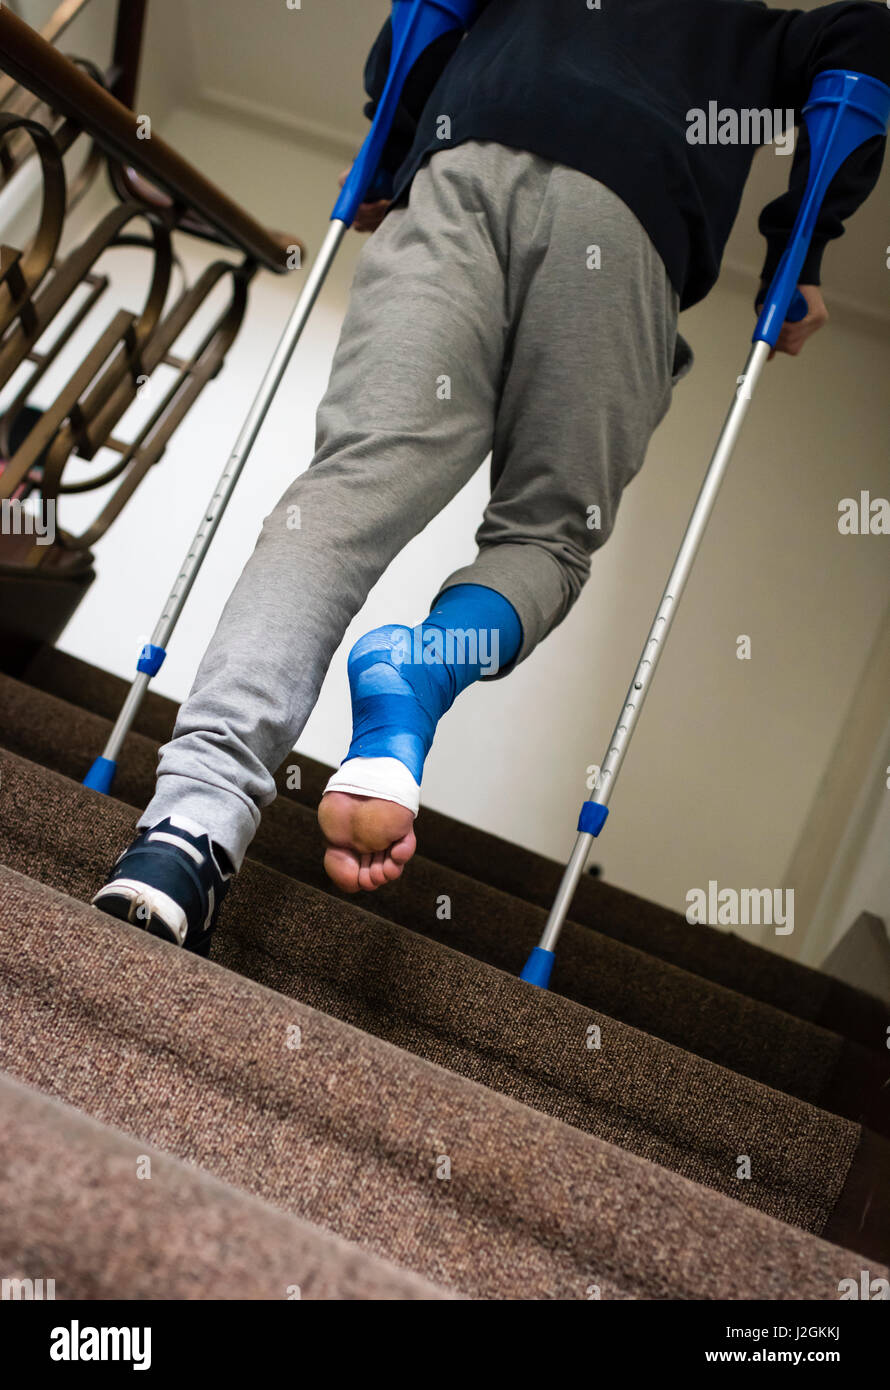 A young adult with crutches and his foot bandaged in plaster is ascending steps of a stairway inside an apartment house. Barefoot toes are sticking ou Stock Photo